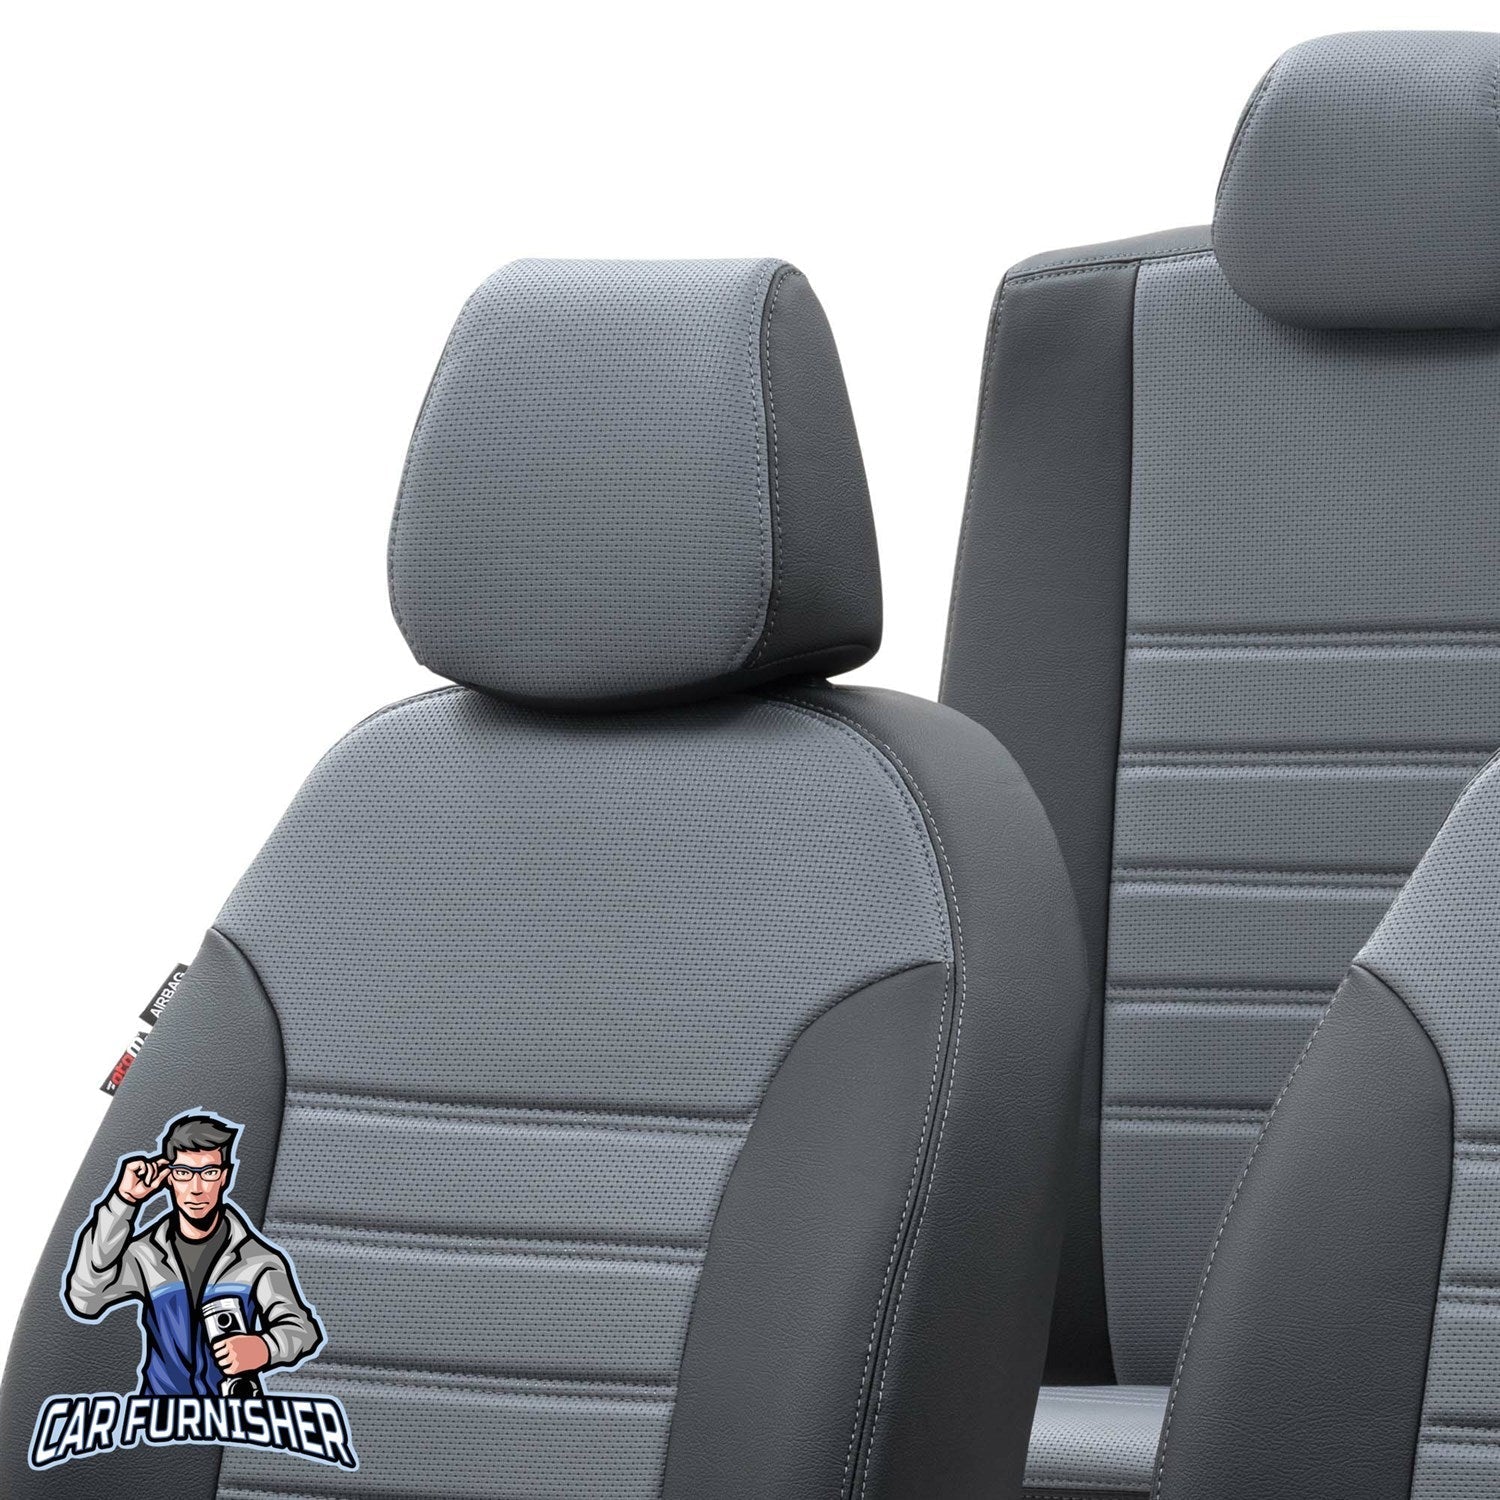 Ssangyong Kyron Seat Covers New York Leather Design Smoked Black Leather